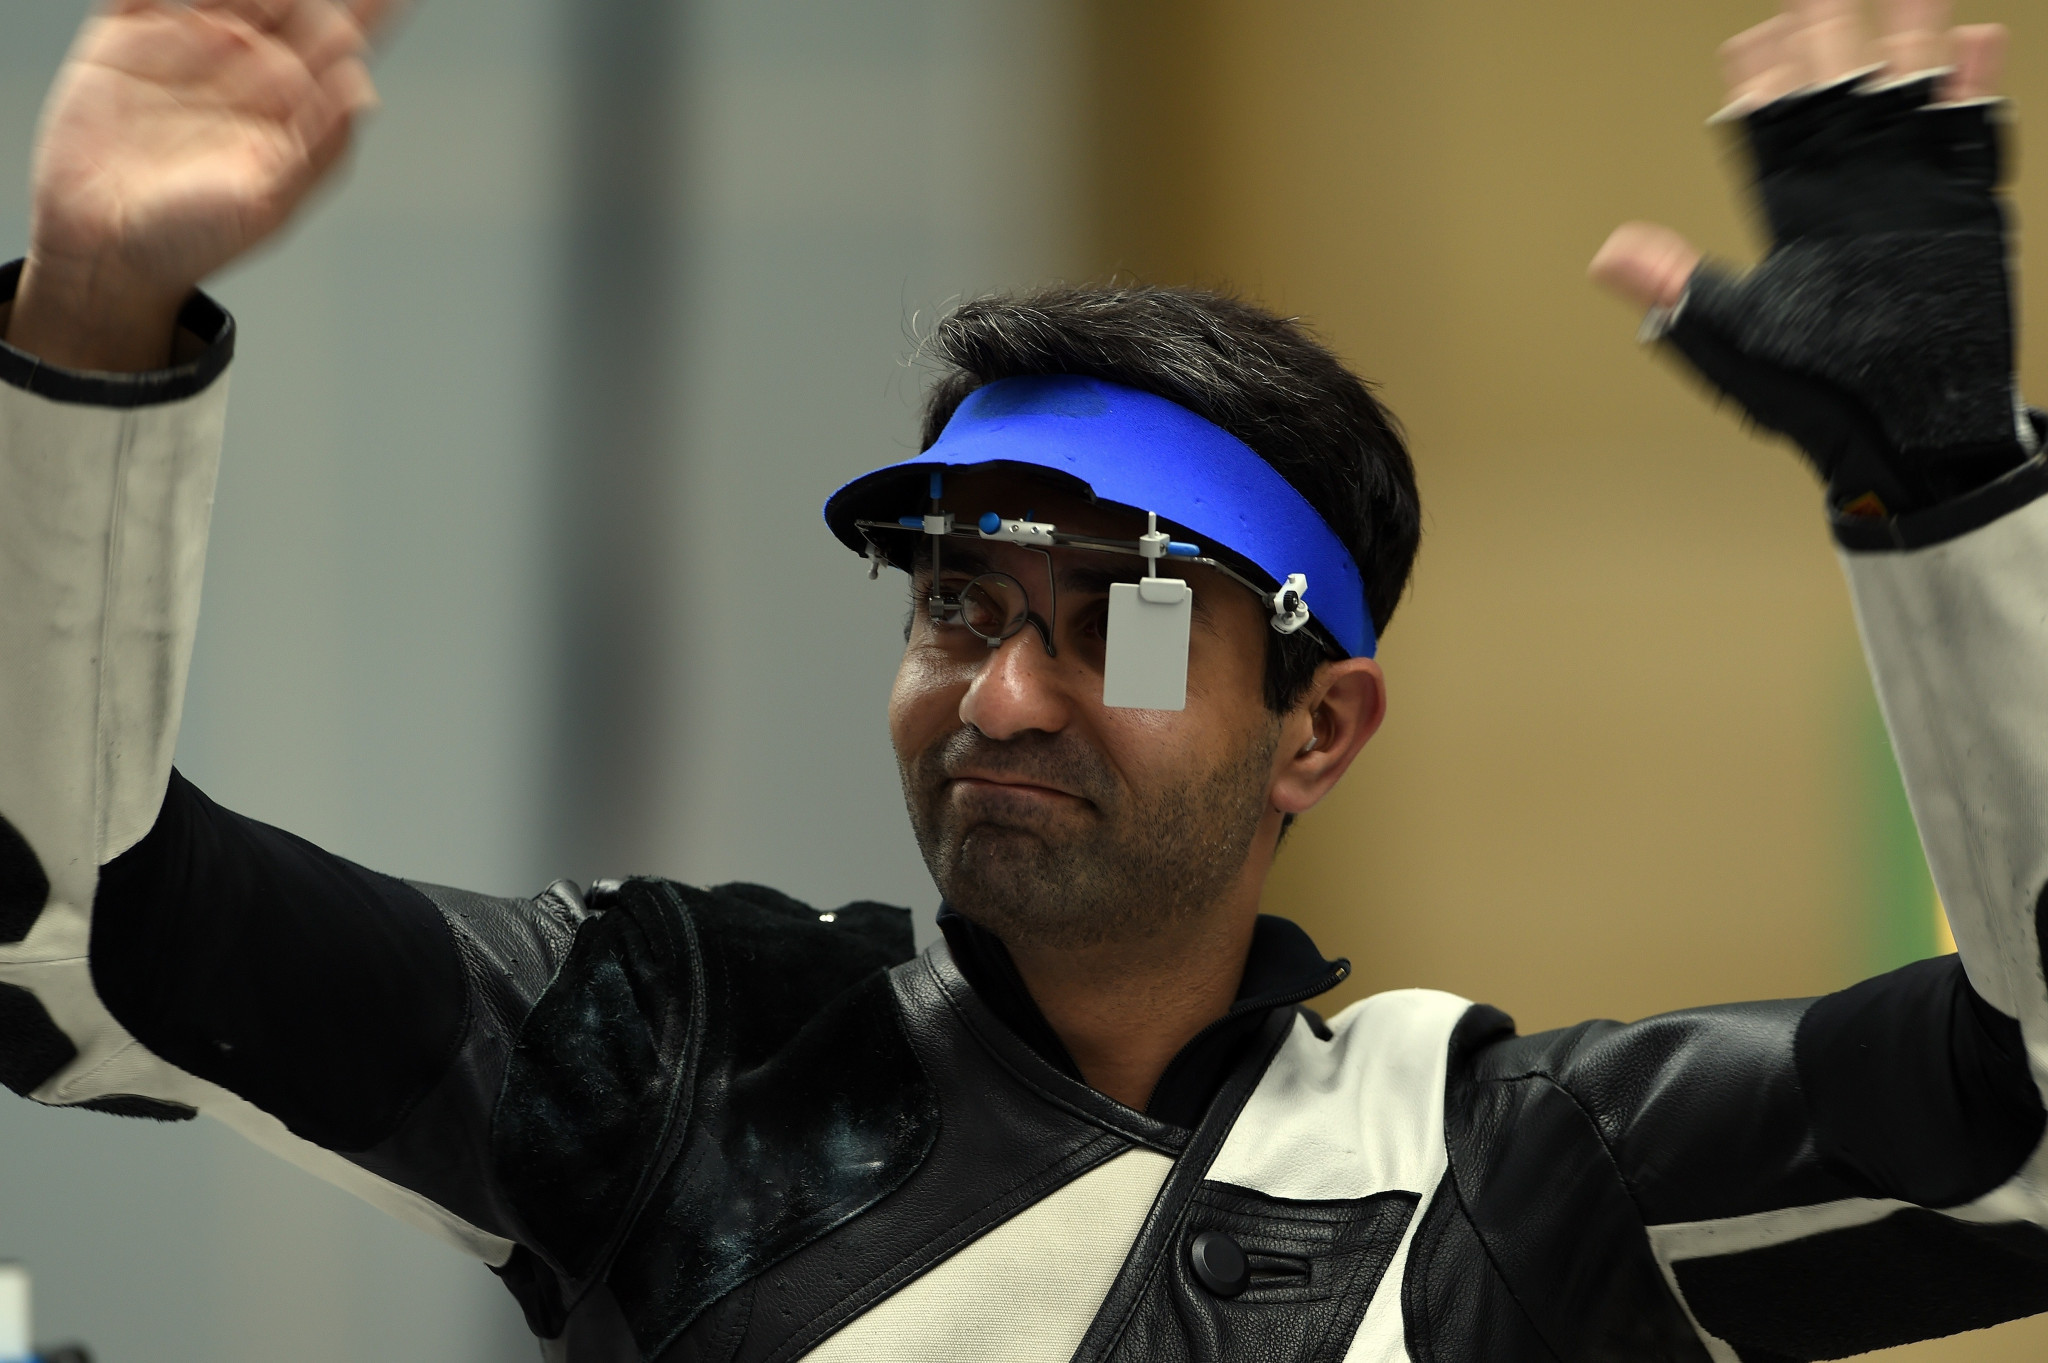 Olympic gold medallist Abhinav Bindra has claimed India should not boycott Birmingham 2022 in protest at shooting's exclusion as it would be unfair to punish athletes in other sports ©Getty Images